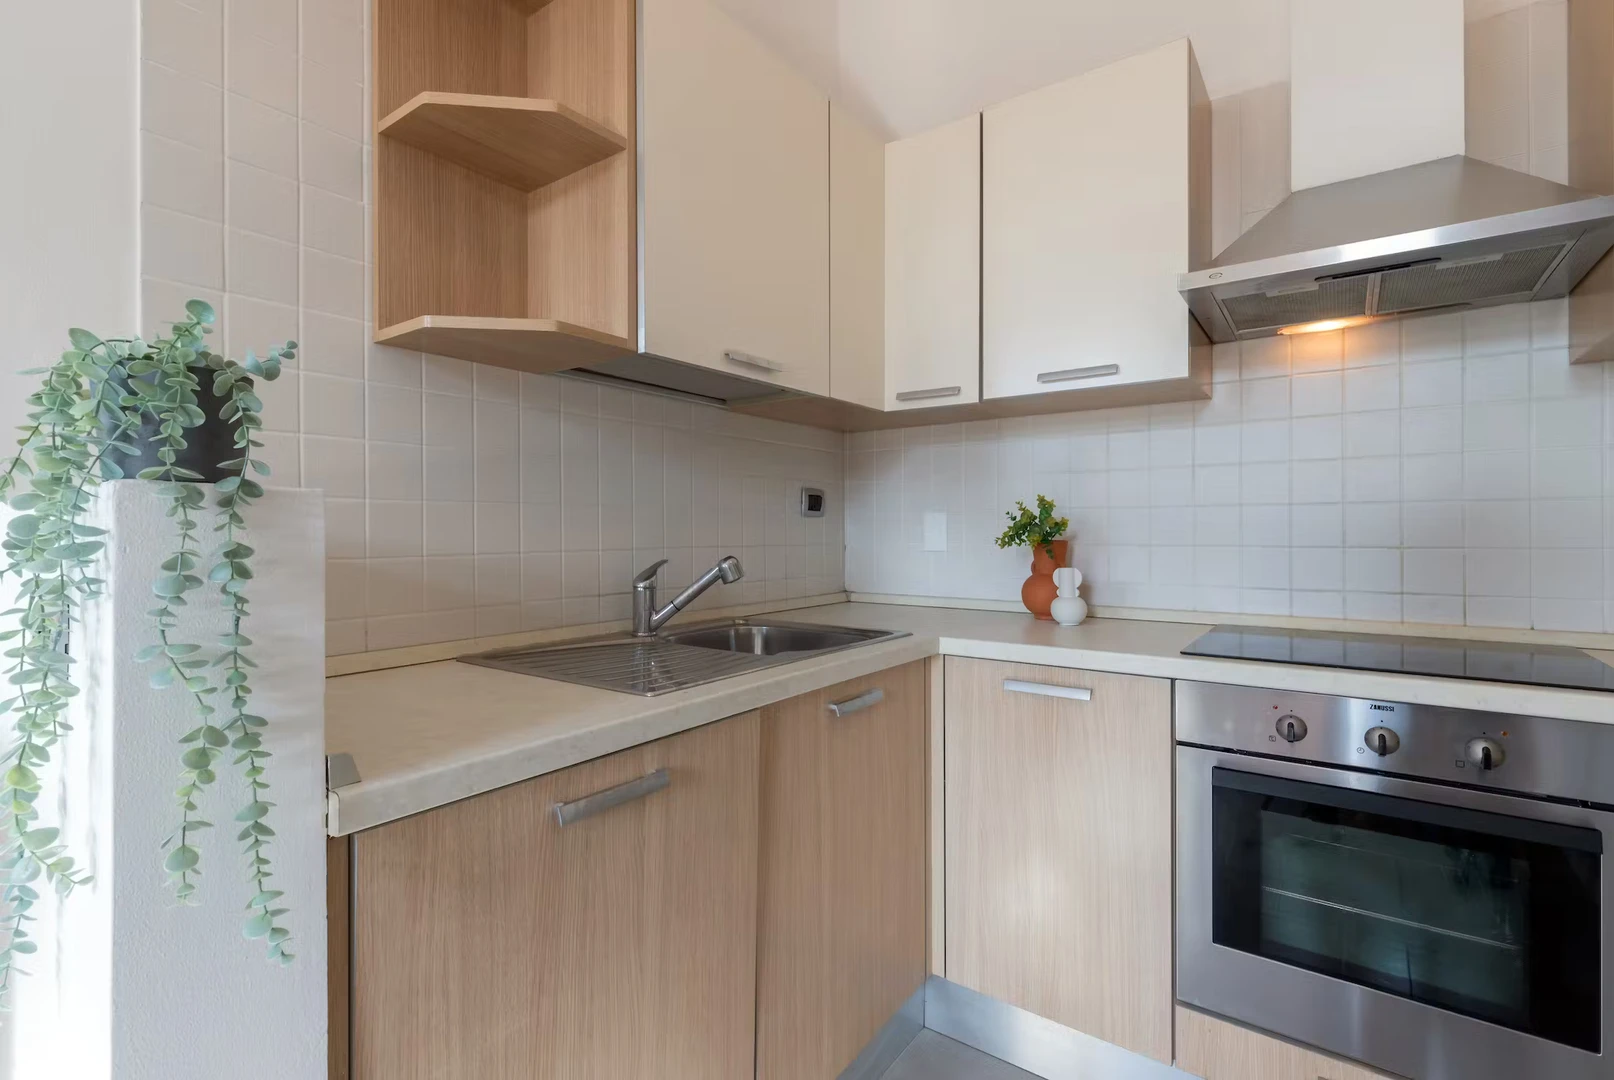 Two bedroom accommodation in Trieste